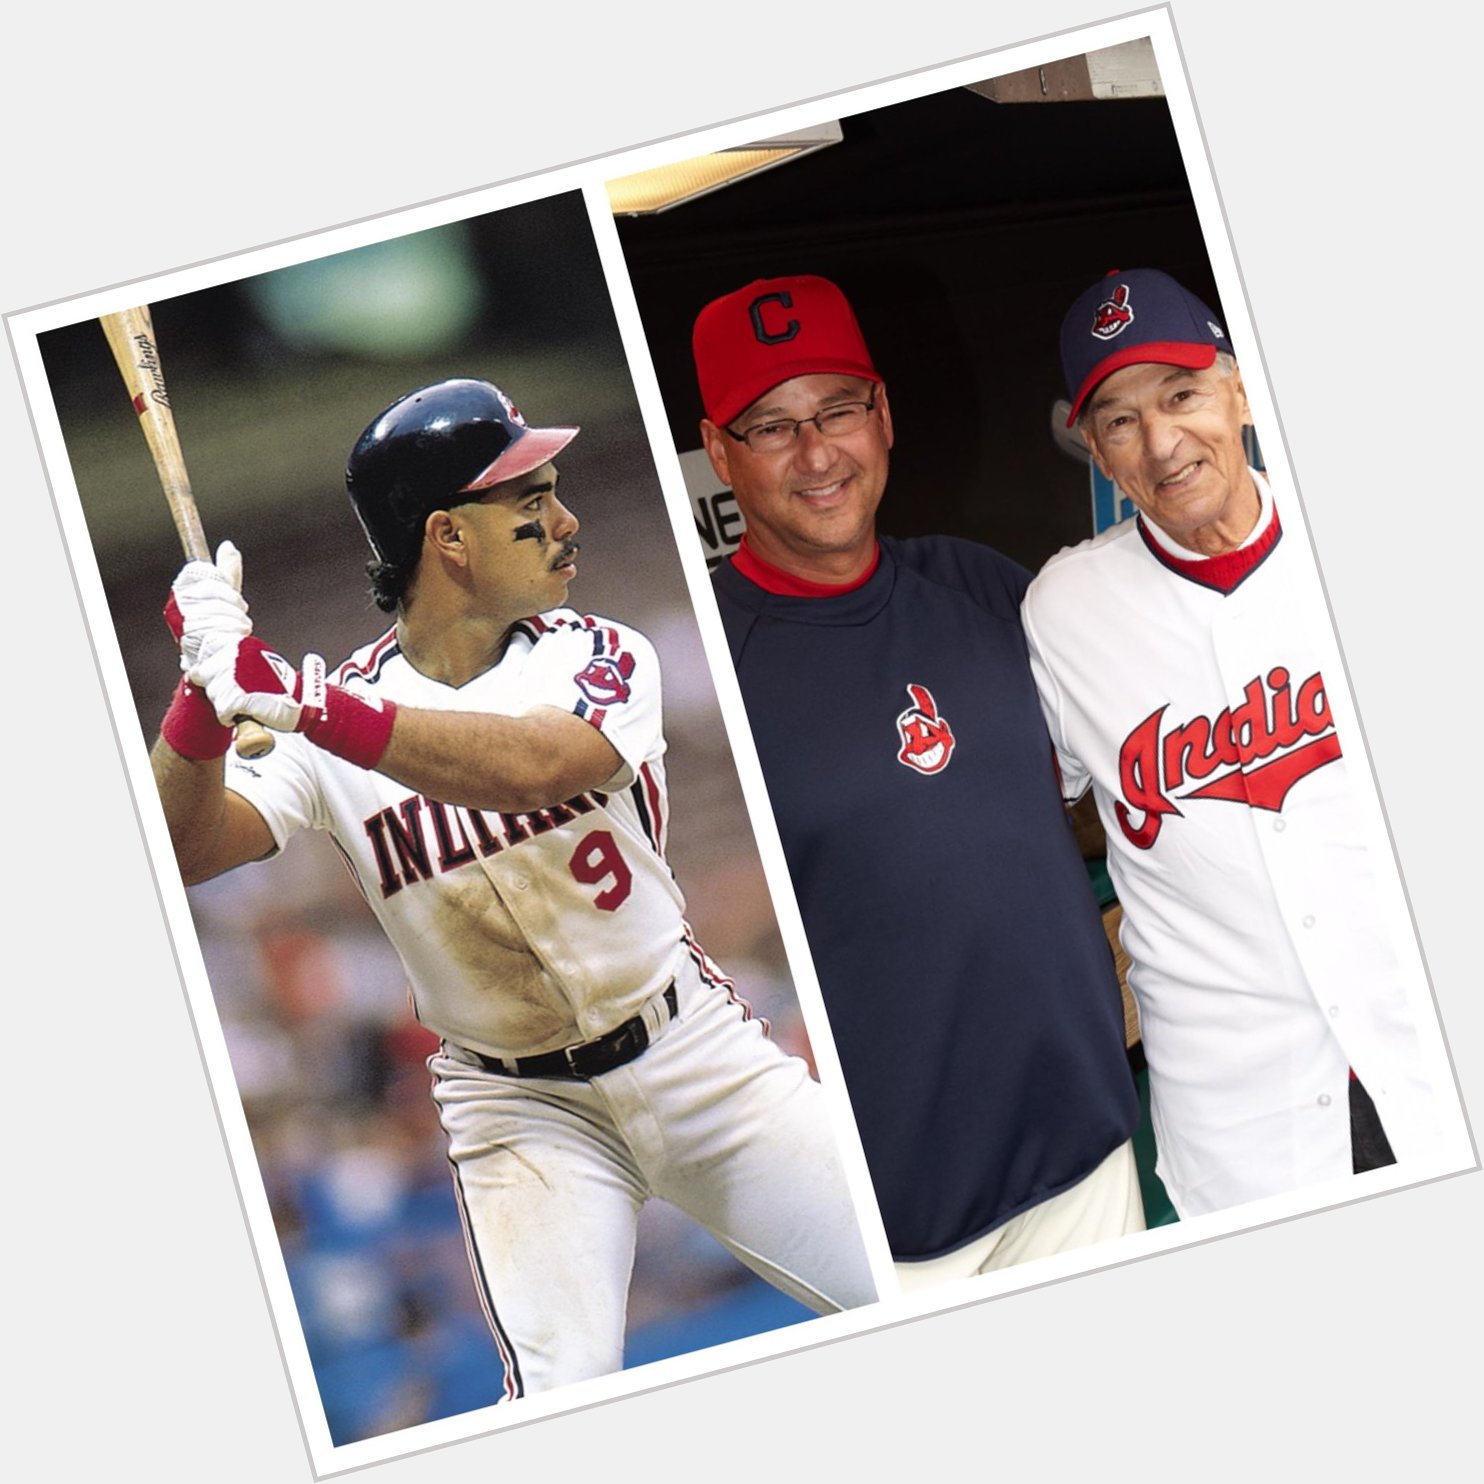 Happy birthday to two Tribe faves: Tito Francona, who must be especially proud of his son today, and Carlos Baerga! 